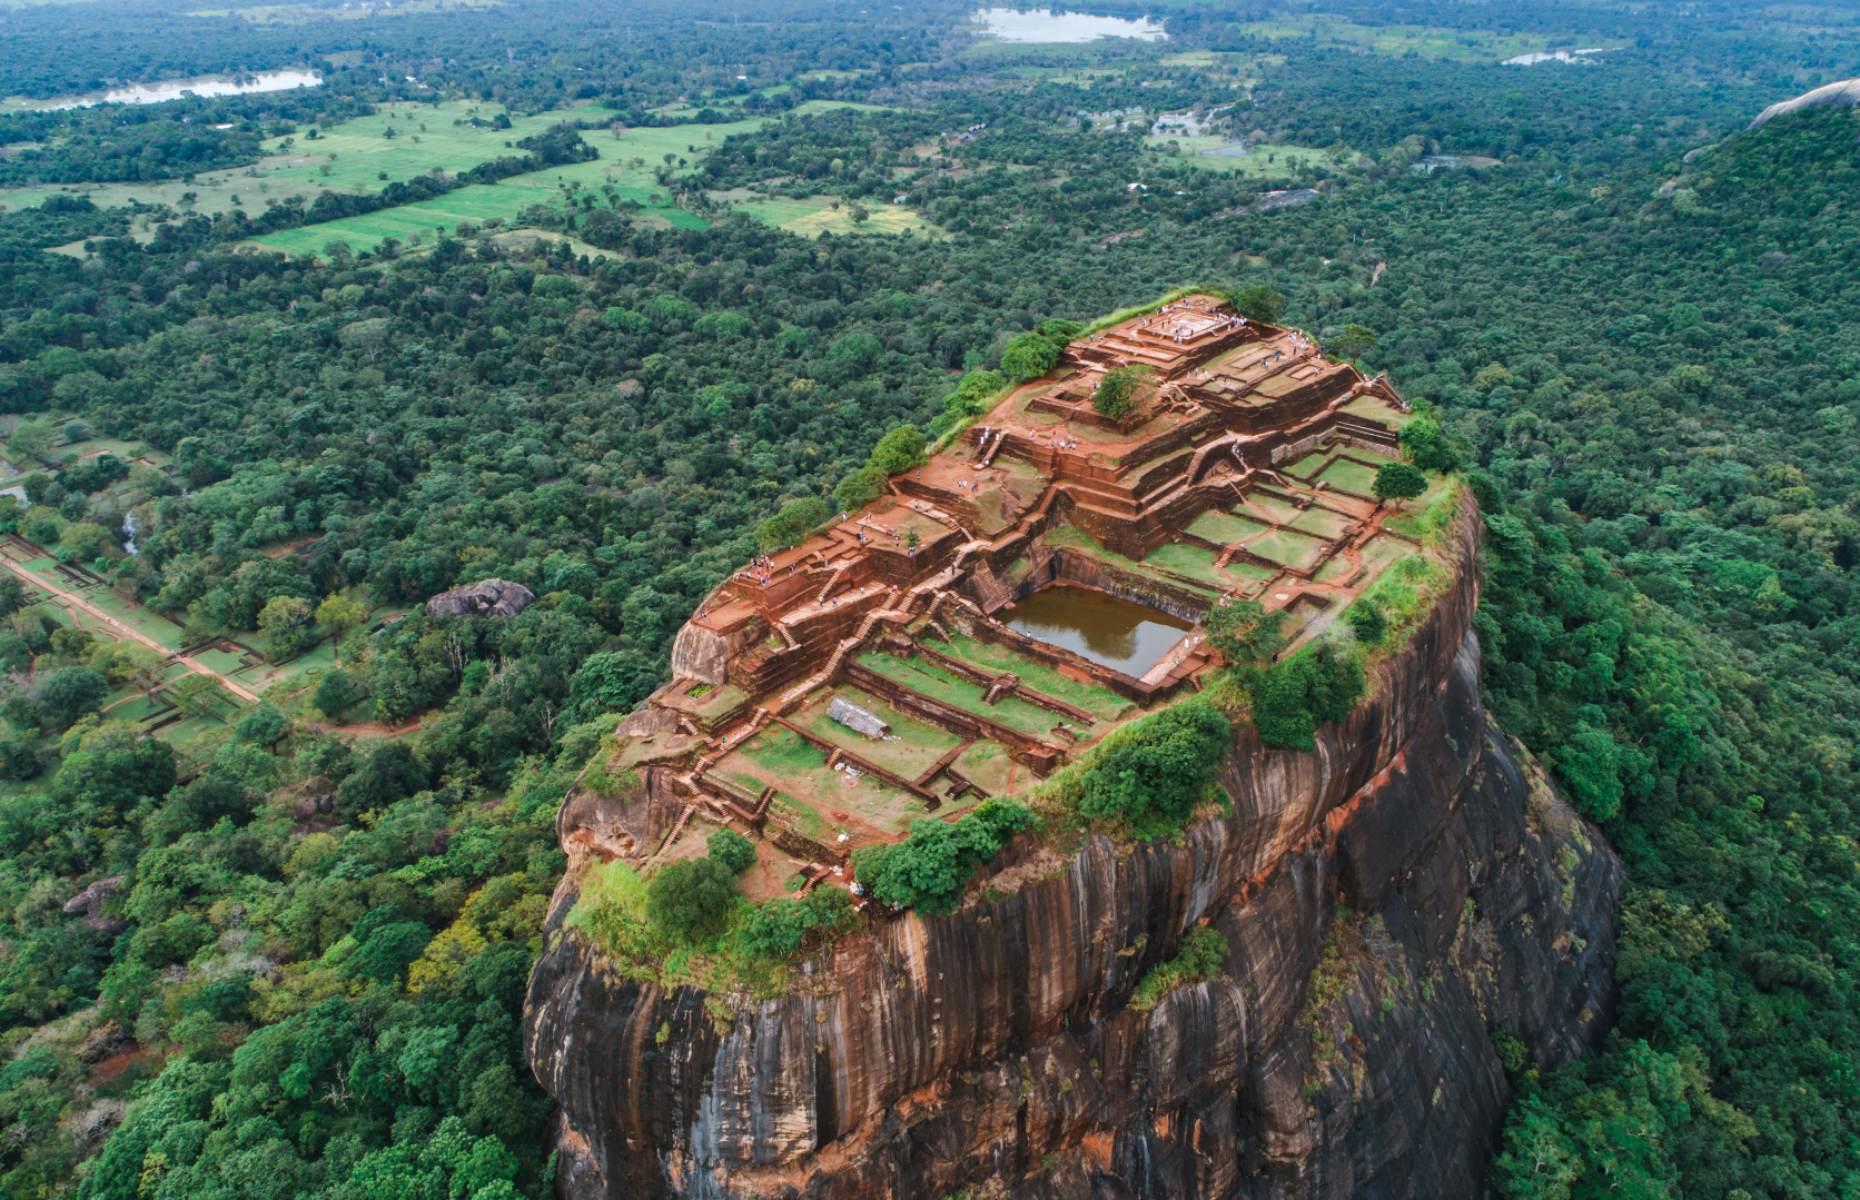 <p>Among the most spellbinding sights in Sri Lanka is Sigiriya, an ancient fortress that juts out above the verdant plains in the country’s northeast. Built by King Kashyapa I in the 5th century AD, the site served as a Buddhist monastery for almost a thousand years, before being abandoned in the 14th century. The only way to access it is through a passageway between a giant pair of rock-hewn lion’s paws, after which you’ll need to climb 1,200 steps to reach the top of the 656-foot (200m) rock column. But we promise the views from the top are worth the climb – visit as early as you can to beat the crowds. </p>